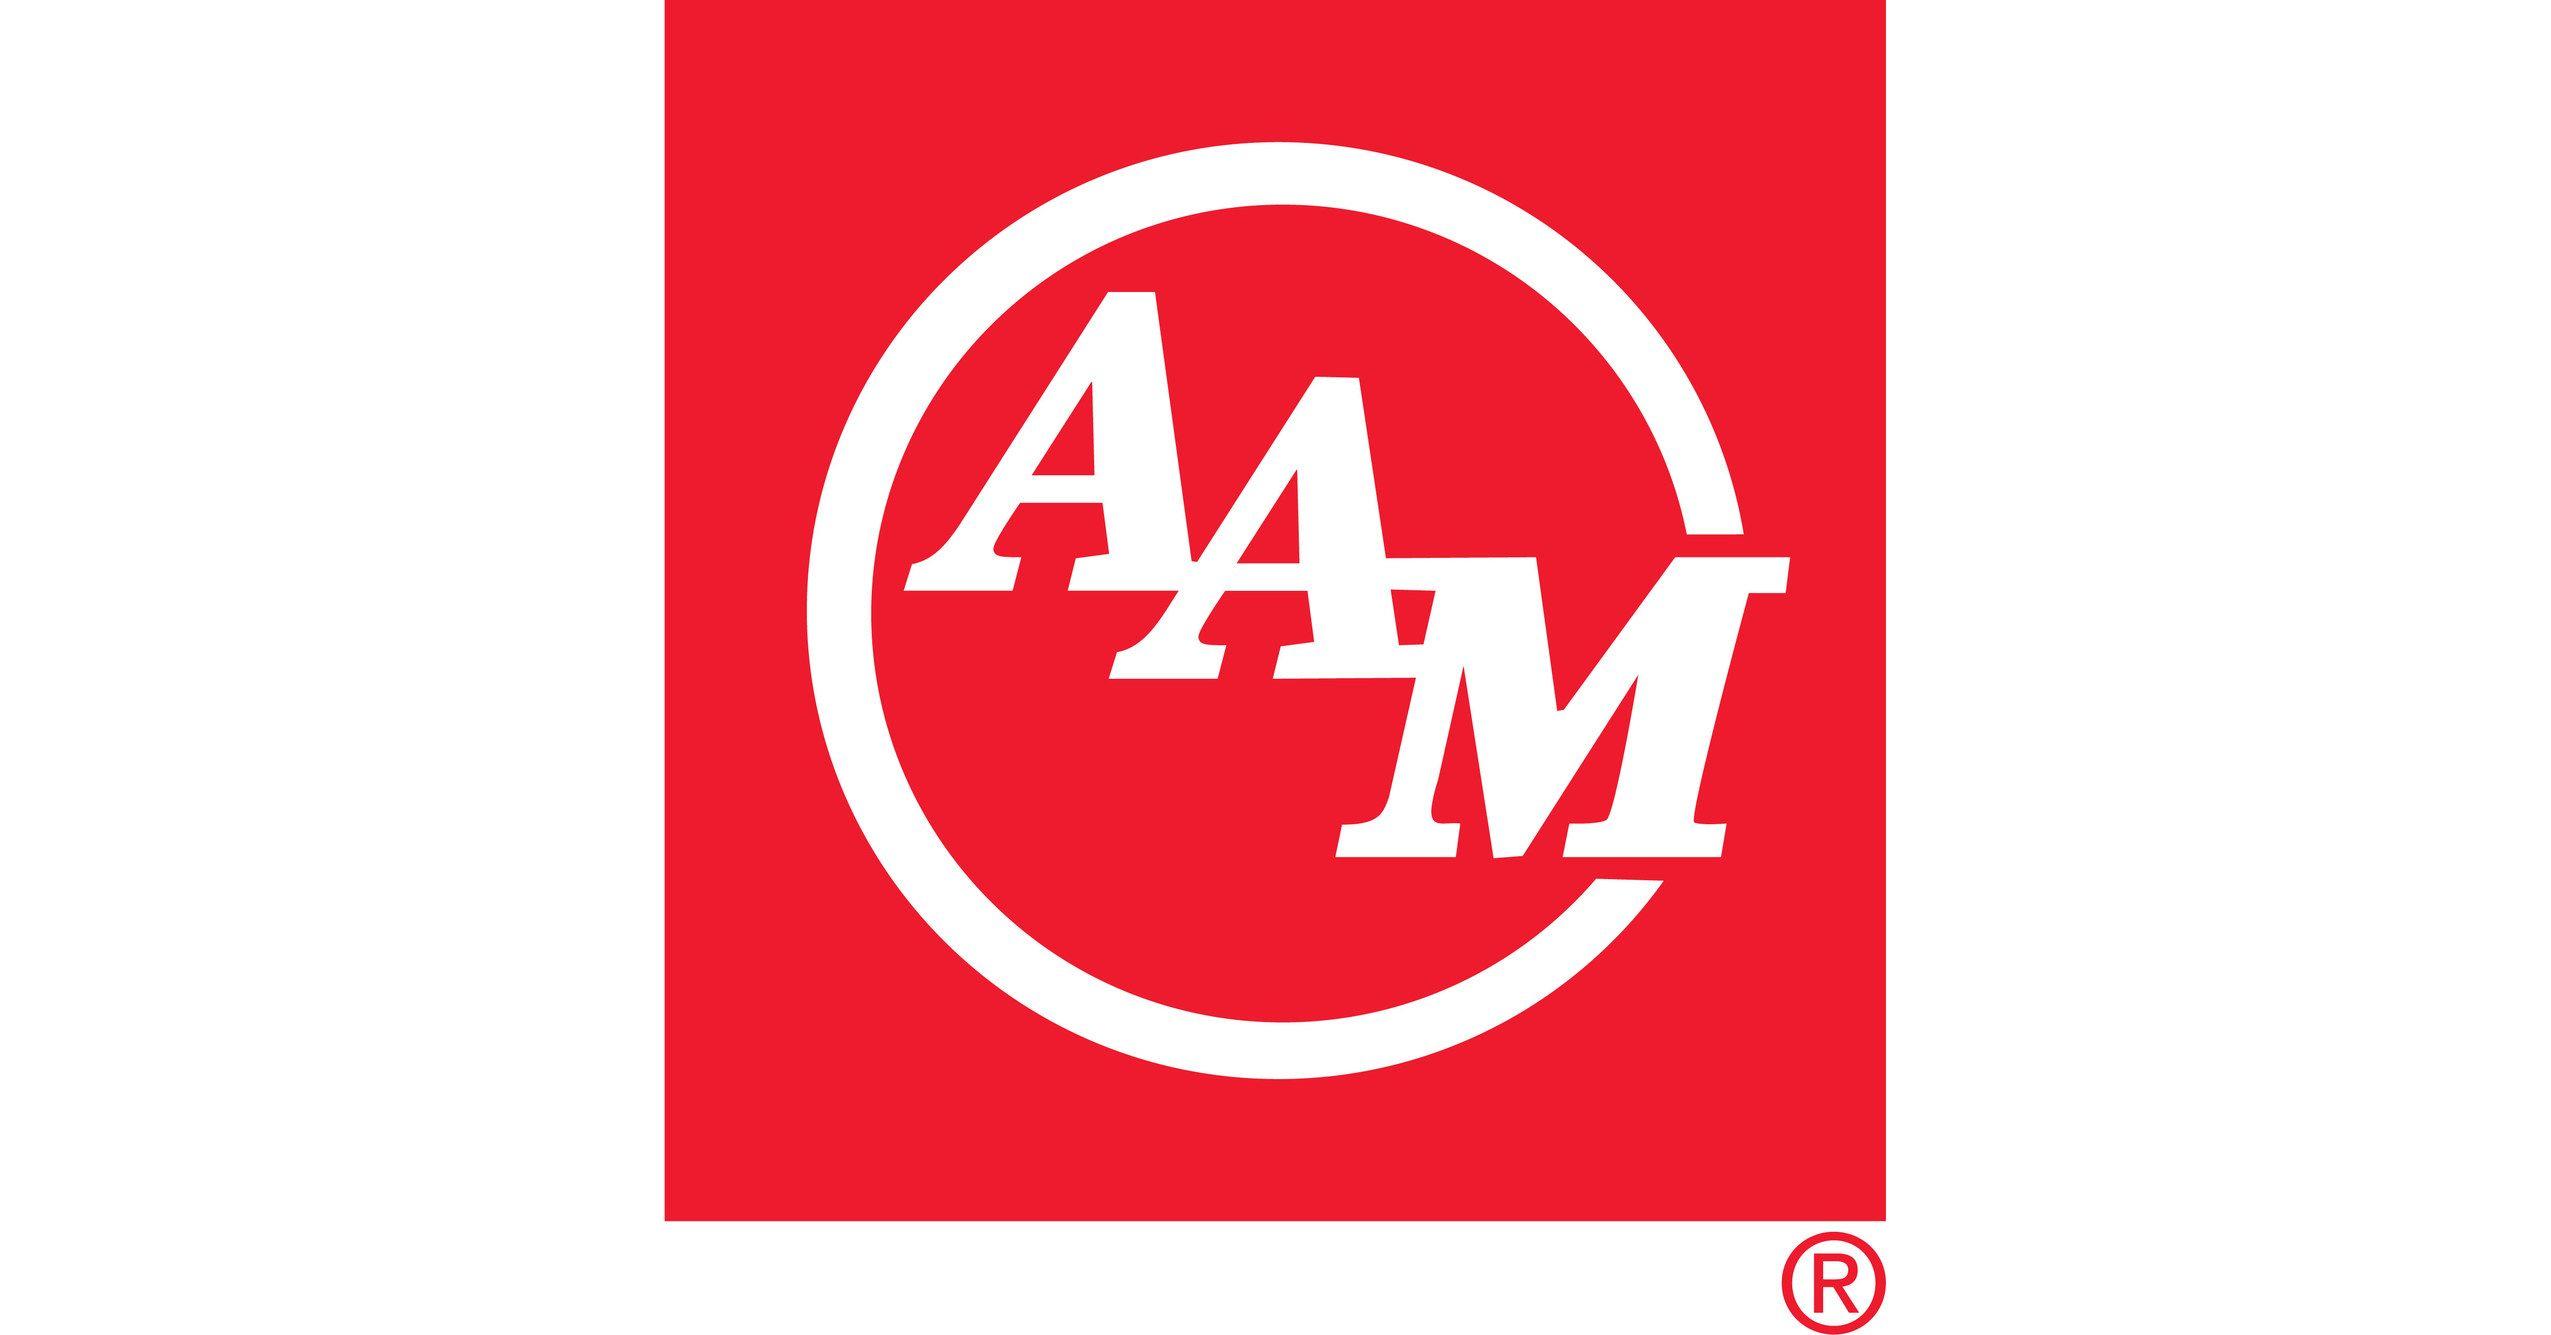 Aam Logo - Trusted Insight | Aam Reports First Quarter 2019 Financial Results ...